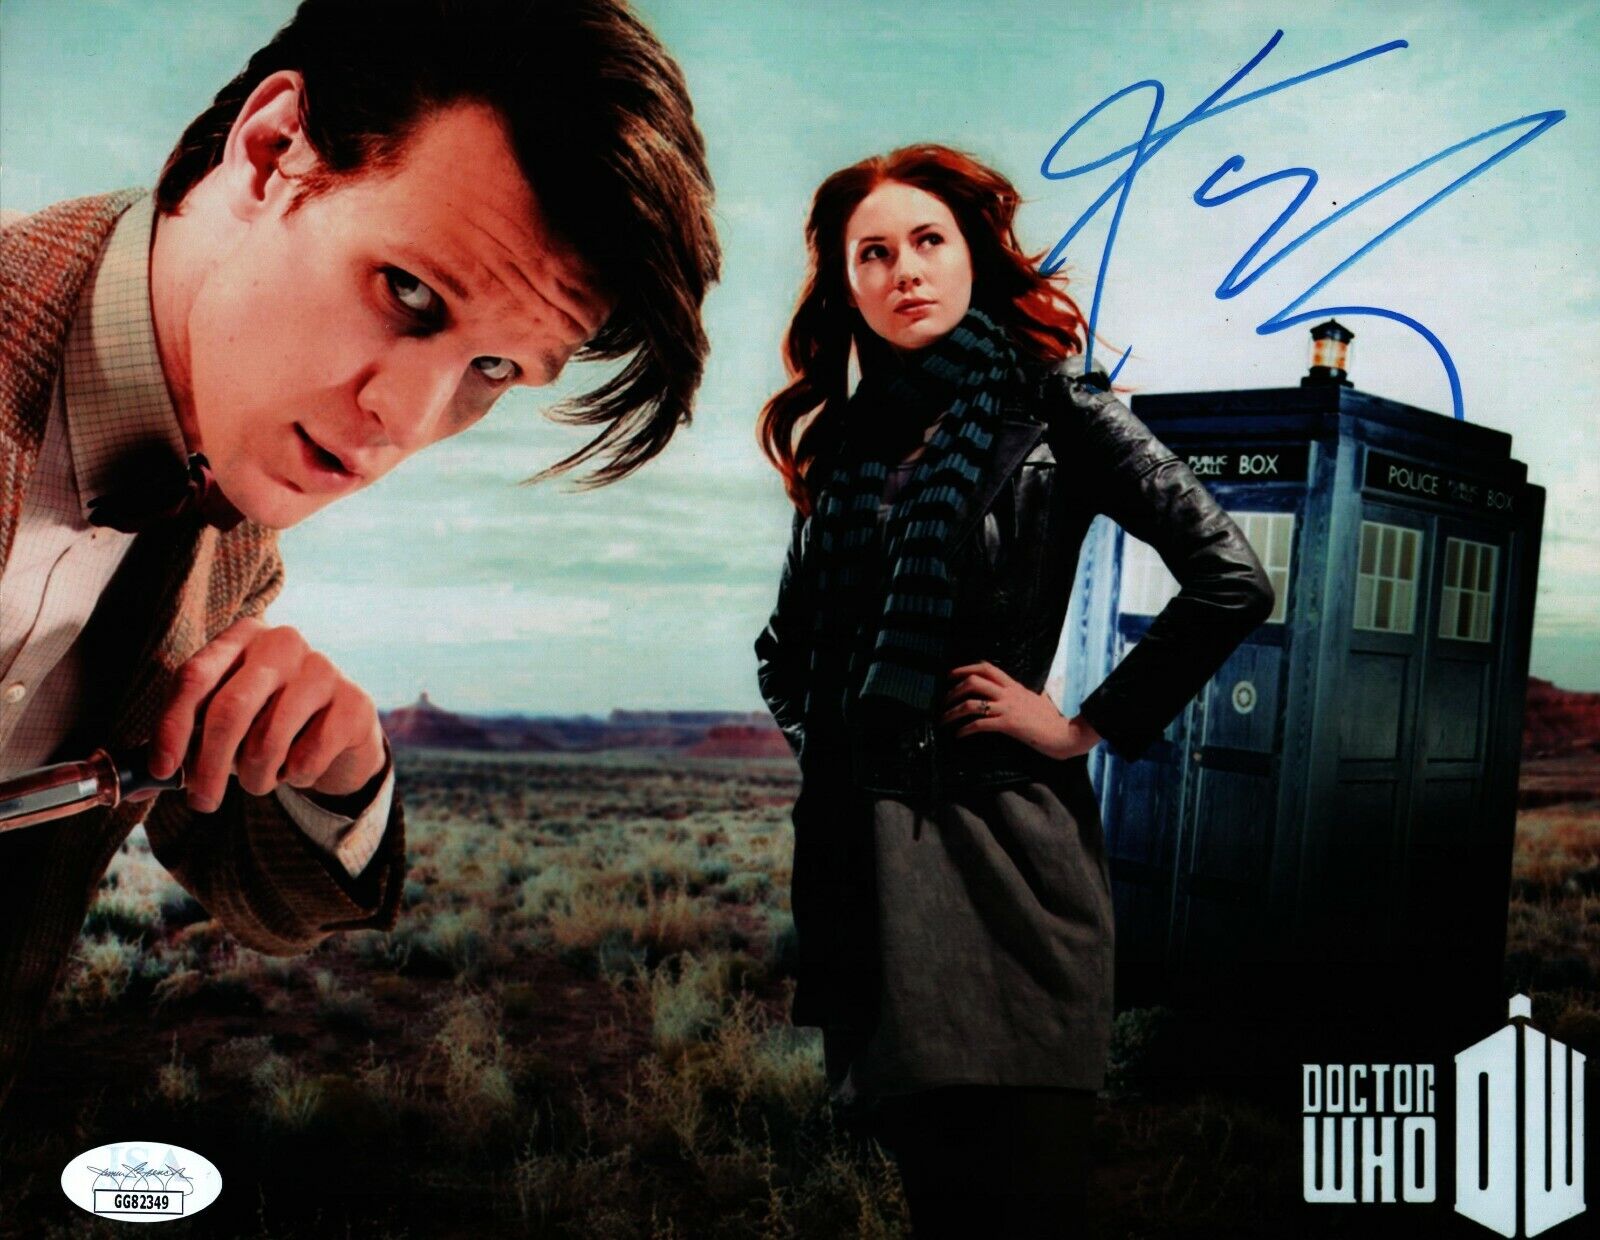 Doctor Who 8x10 Photo Poster painting JSA Certified COA Signed Autographed by Karen Gillan